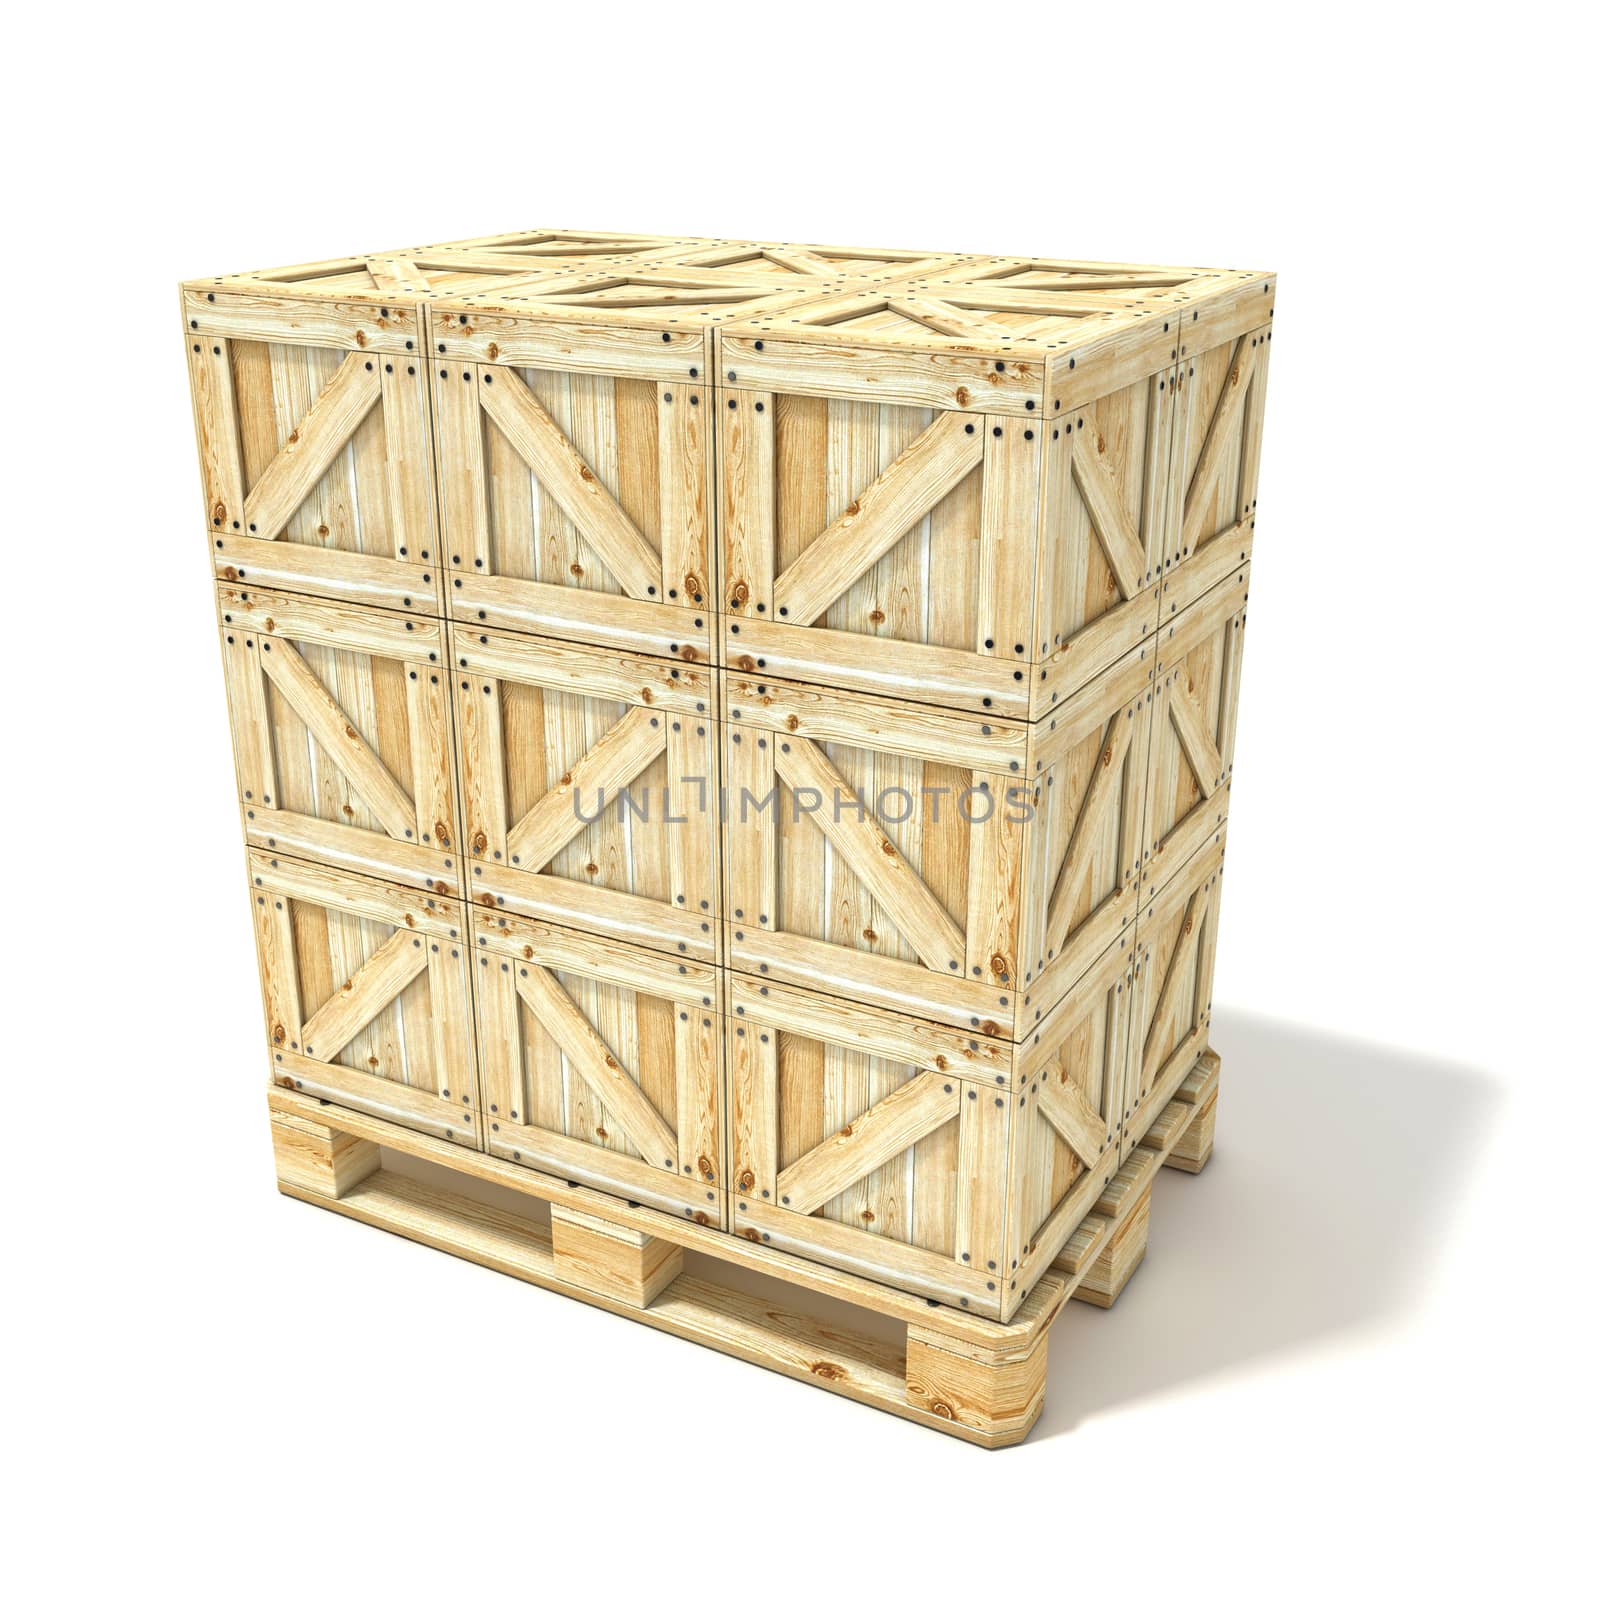 Wooden boxes on euro pallet. 3D by djmilic